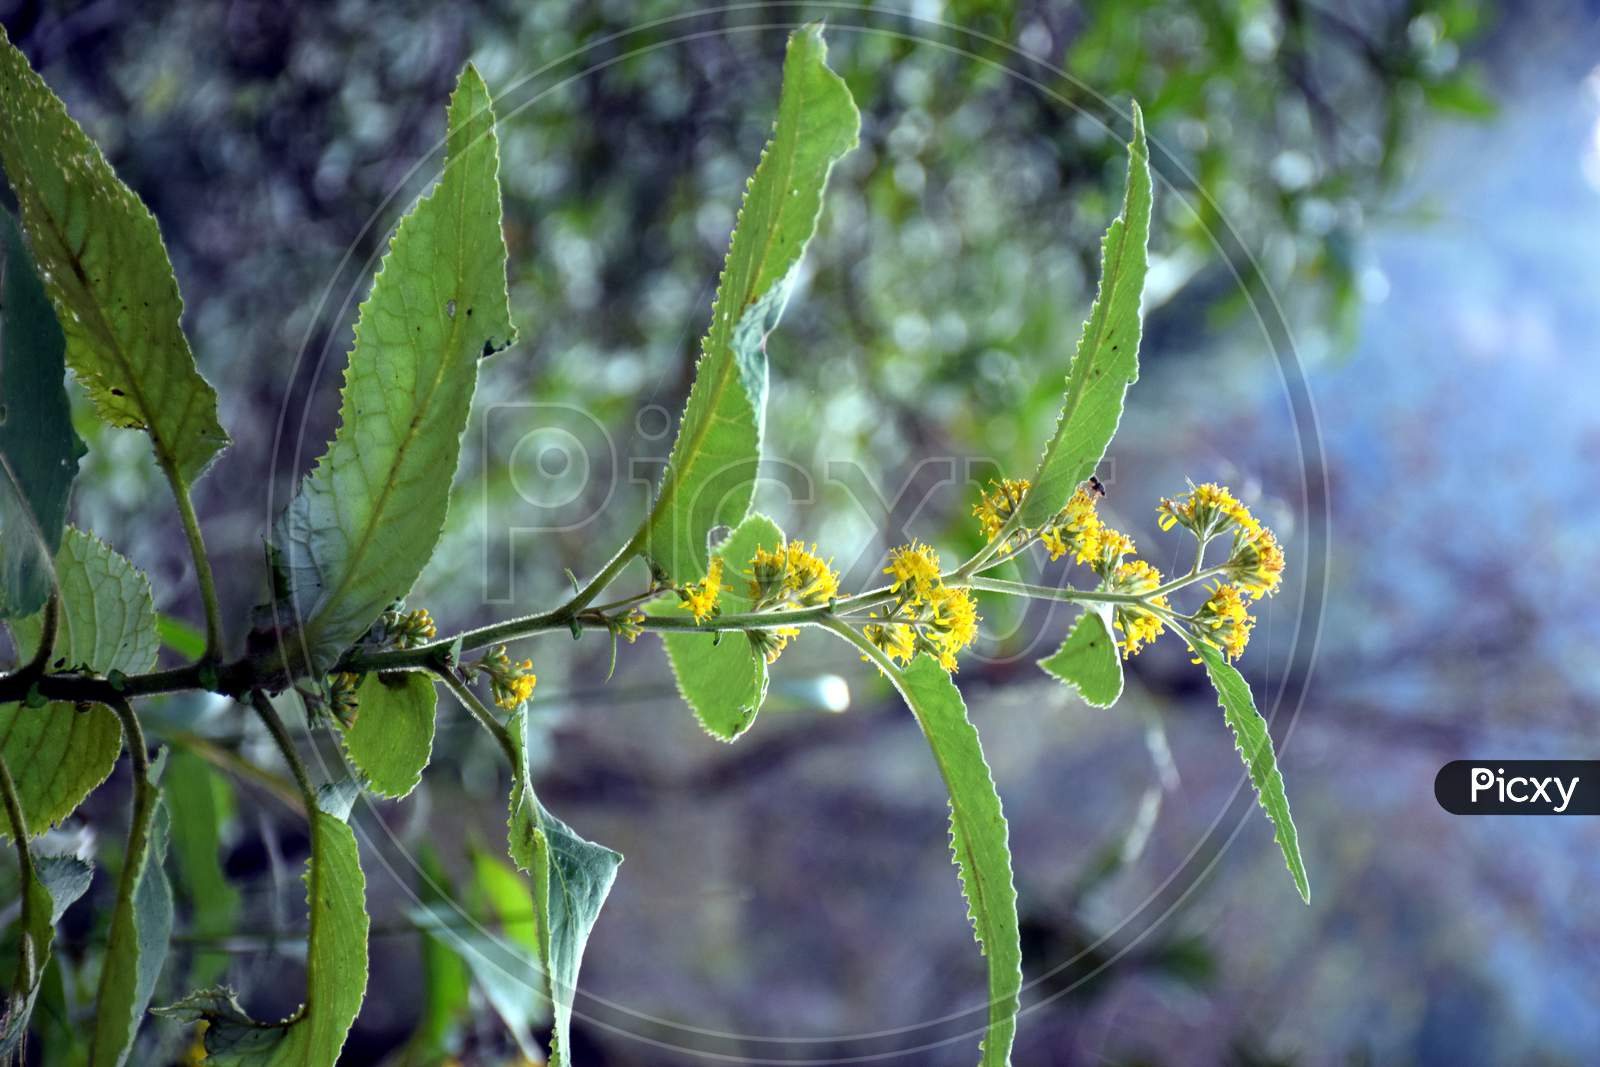 Beautiful Picture Of Green Plant And Yellow Flower On It,